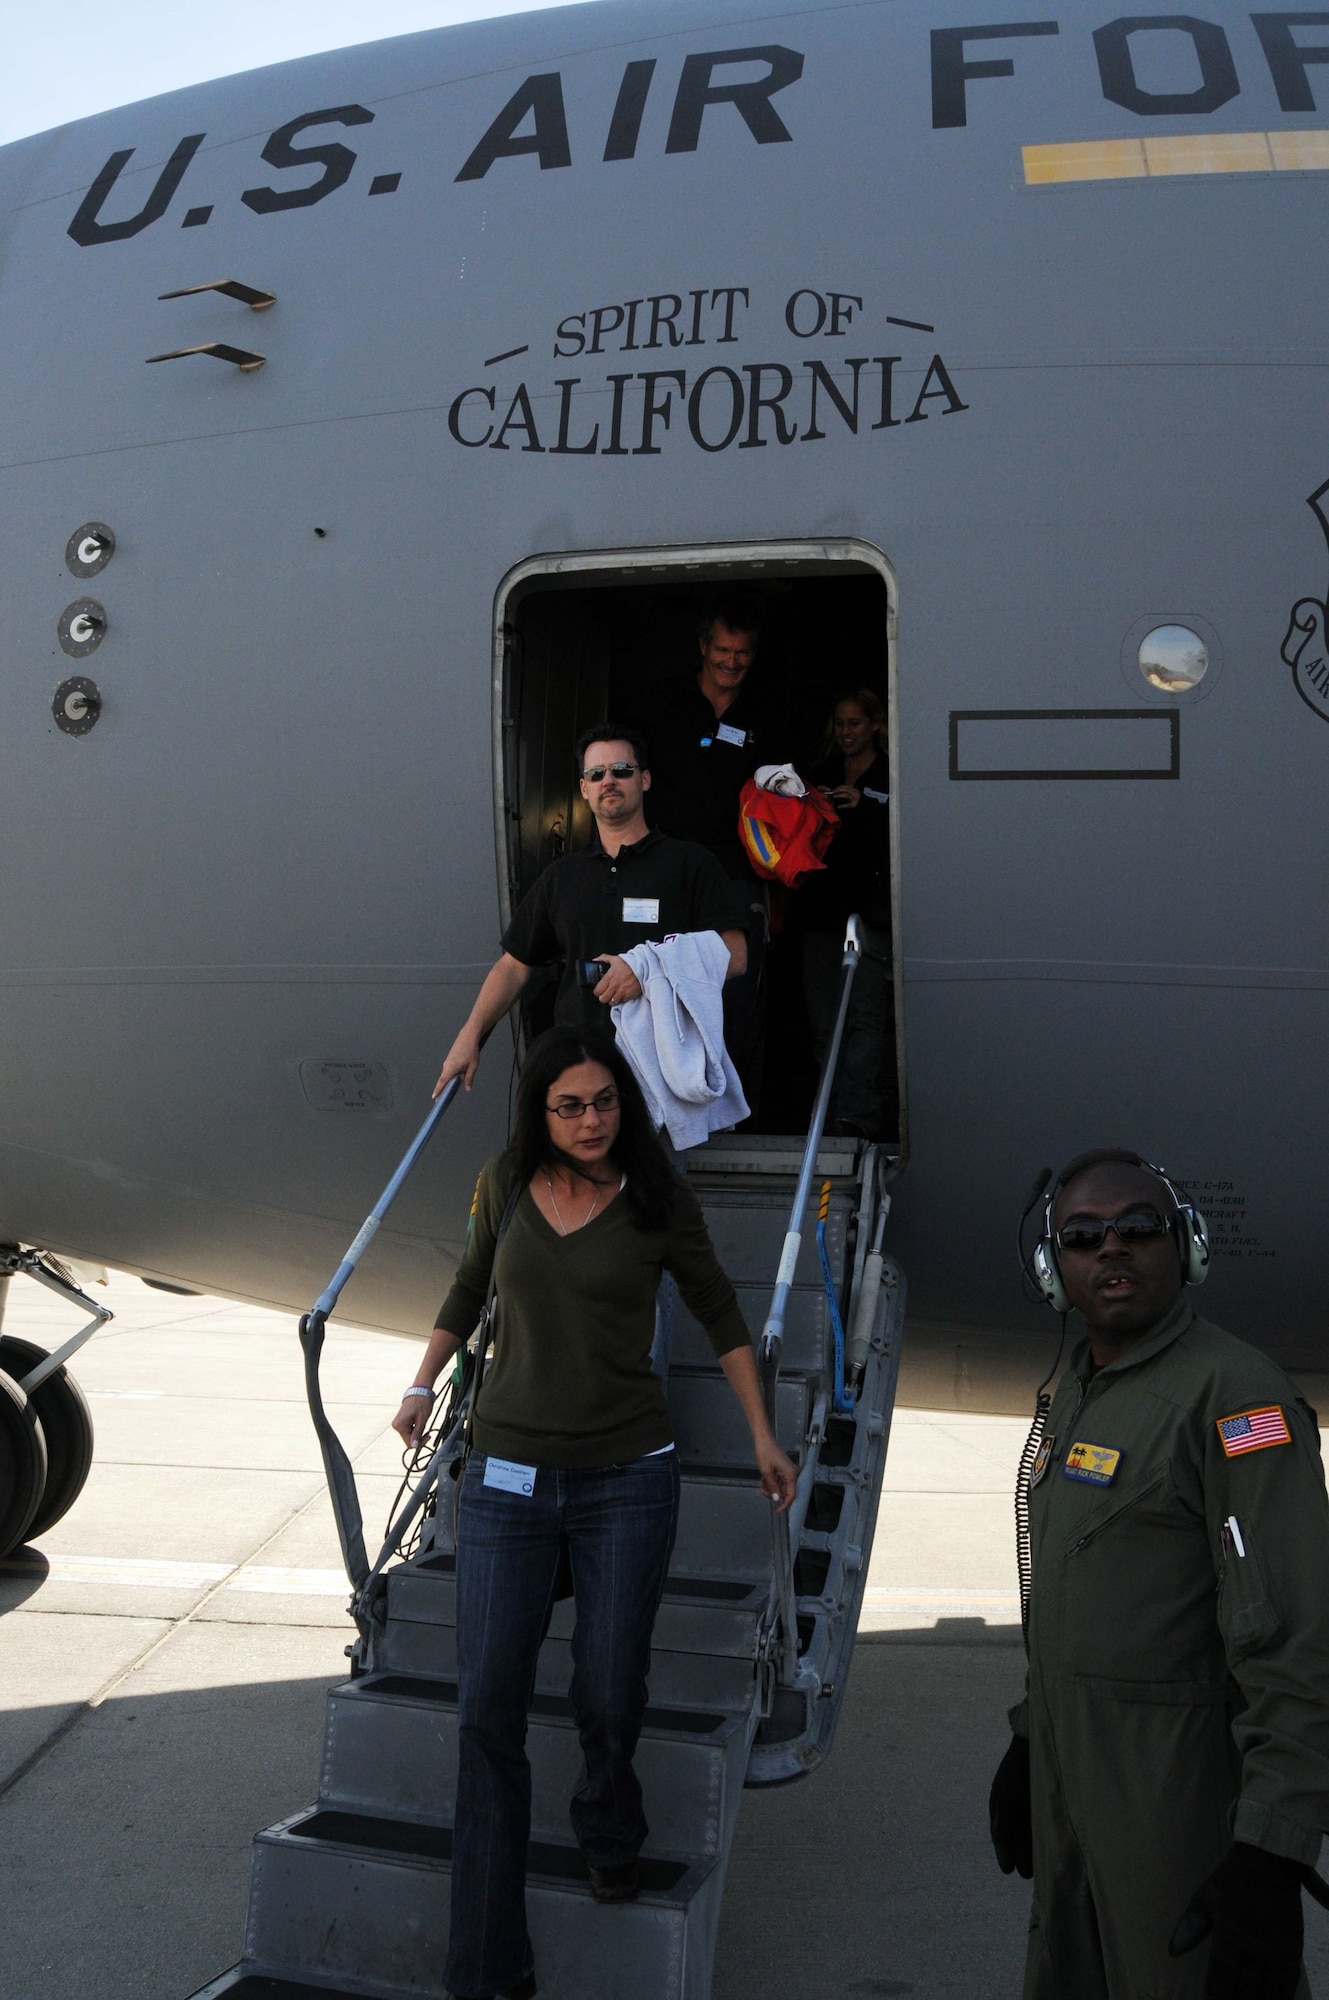 Members of the entertainment industry get familiar with a C-17 before their flight, and deplane after a refueling mission at March ARB as part of Air Force Week. (U.S. Air Force photo by Lt. Col. Francisco Hamm)